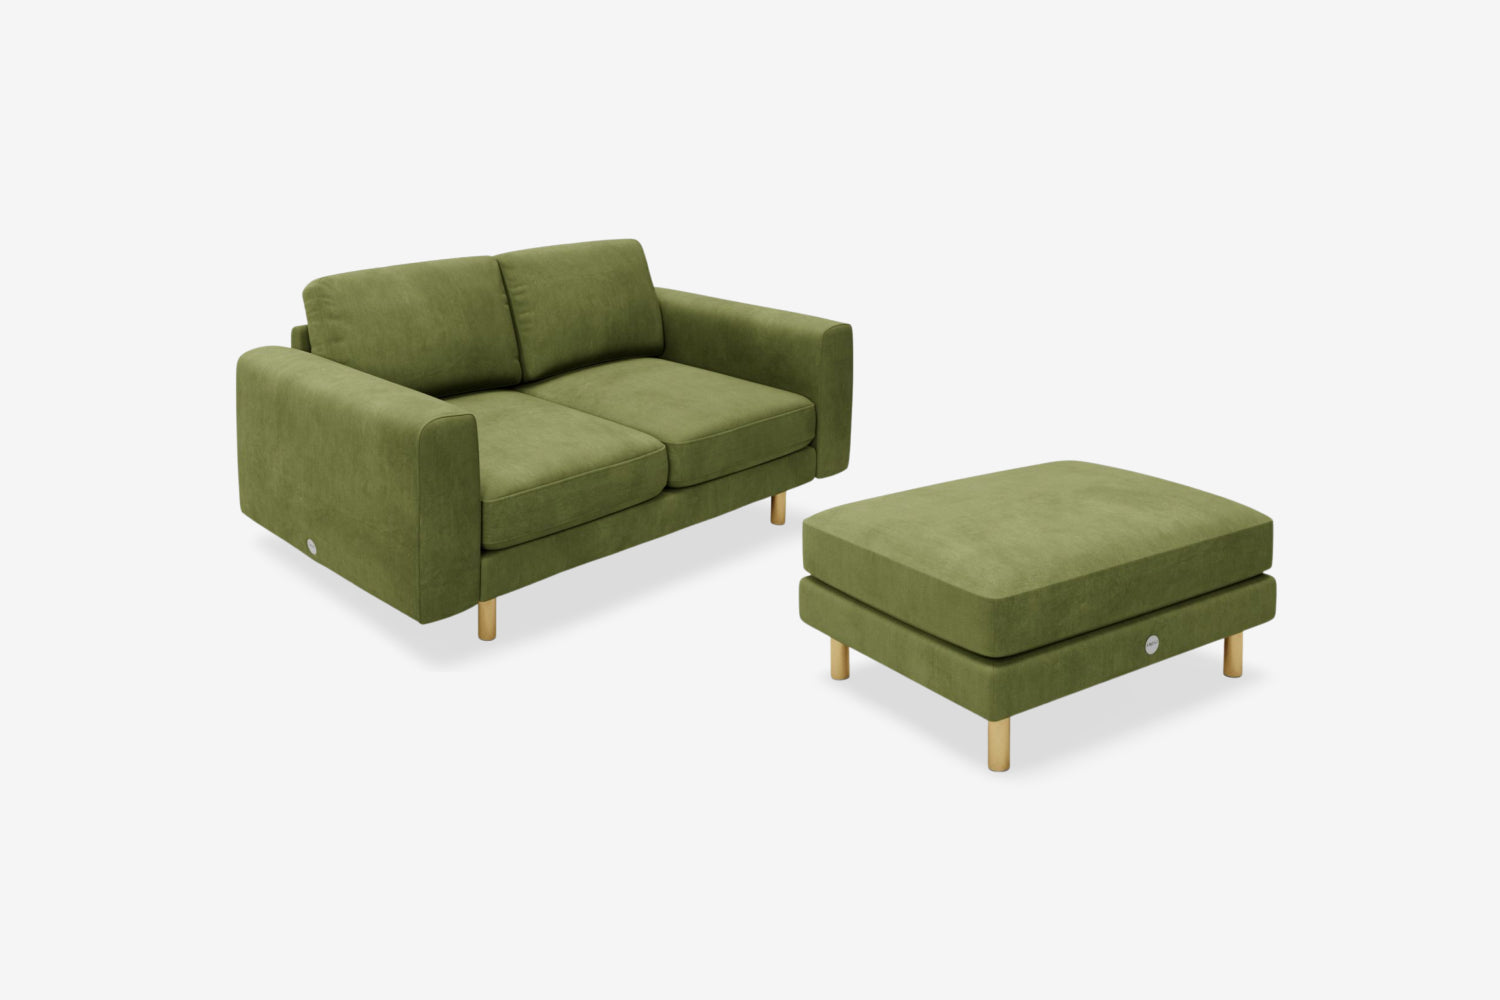 The Big Chill - 2 Seater Sofa and Footstool Set - Olive